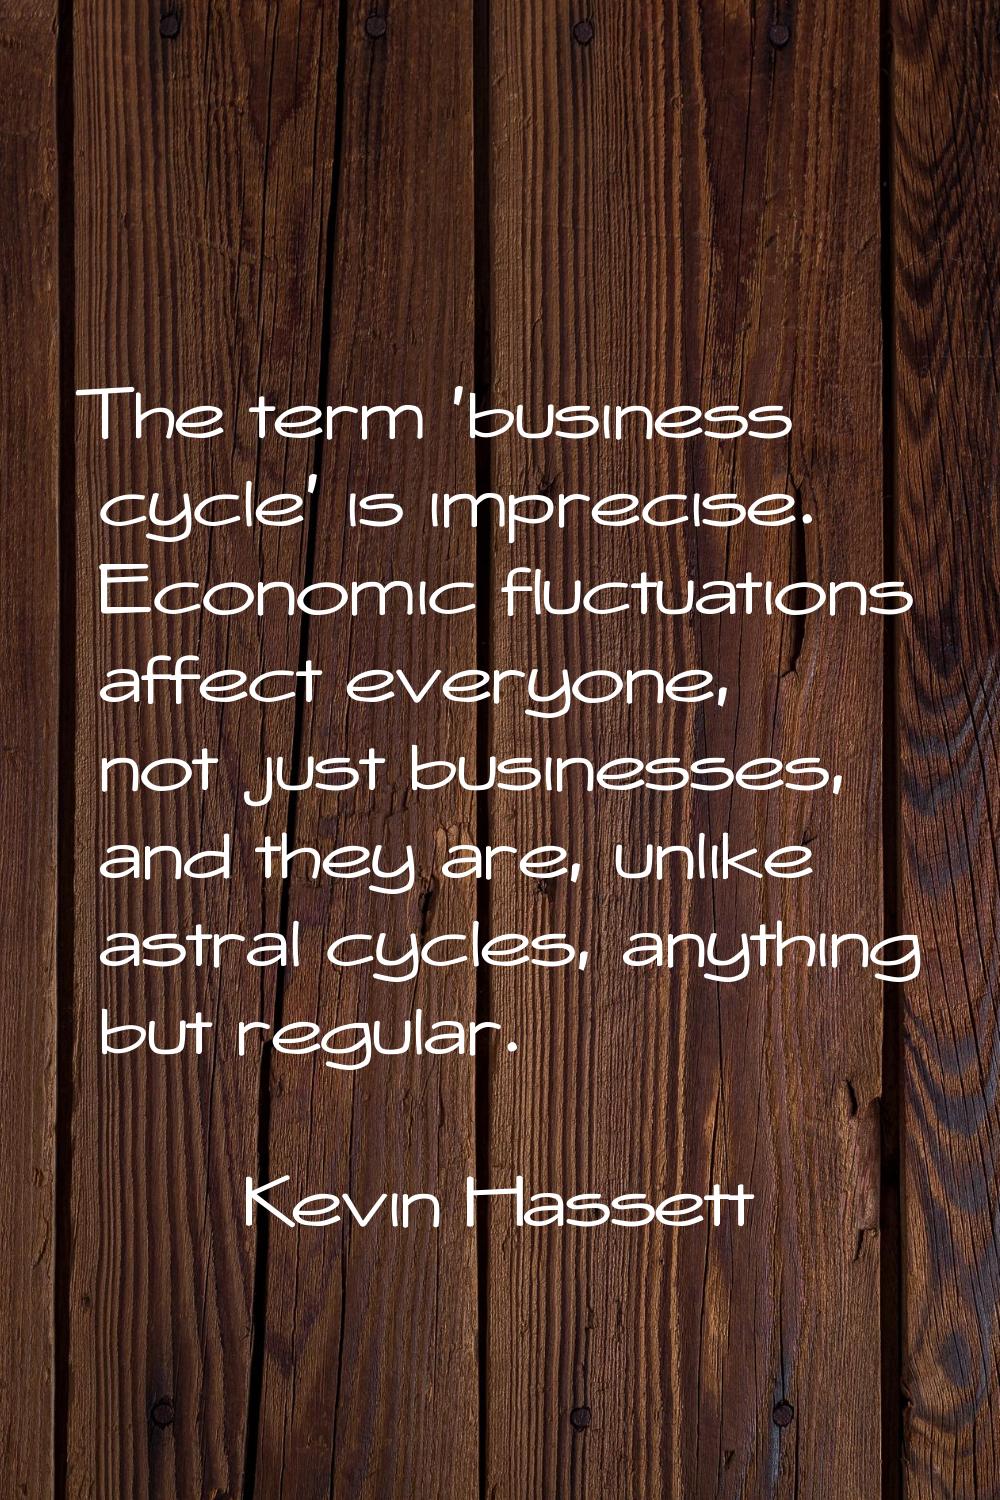 The term 'business cycle' is imprecise. Economic fluctuations affect everyone, not just businesses,